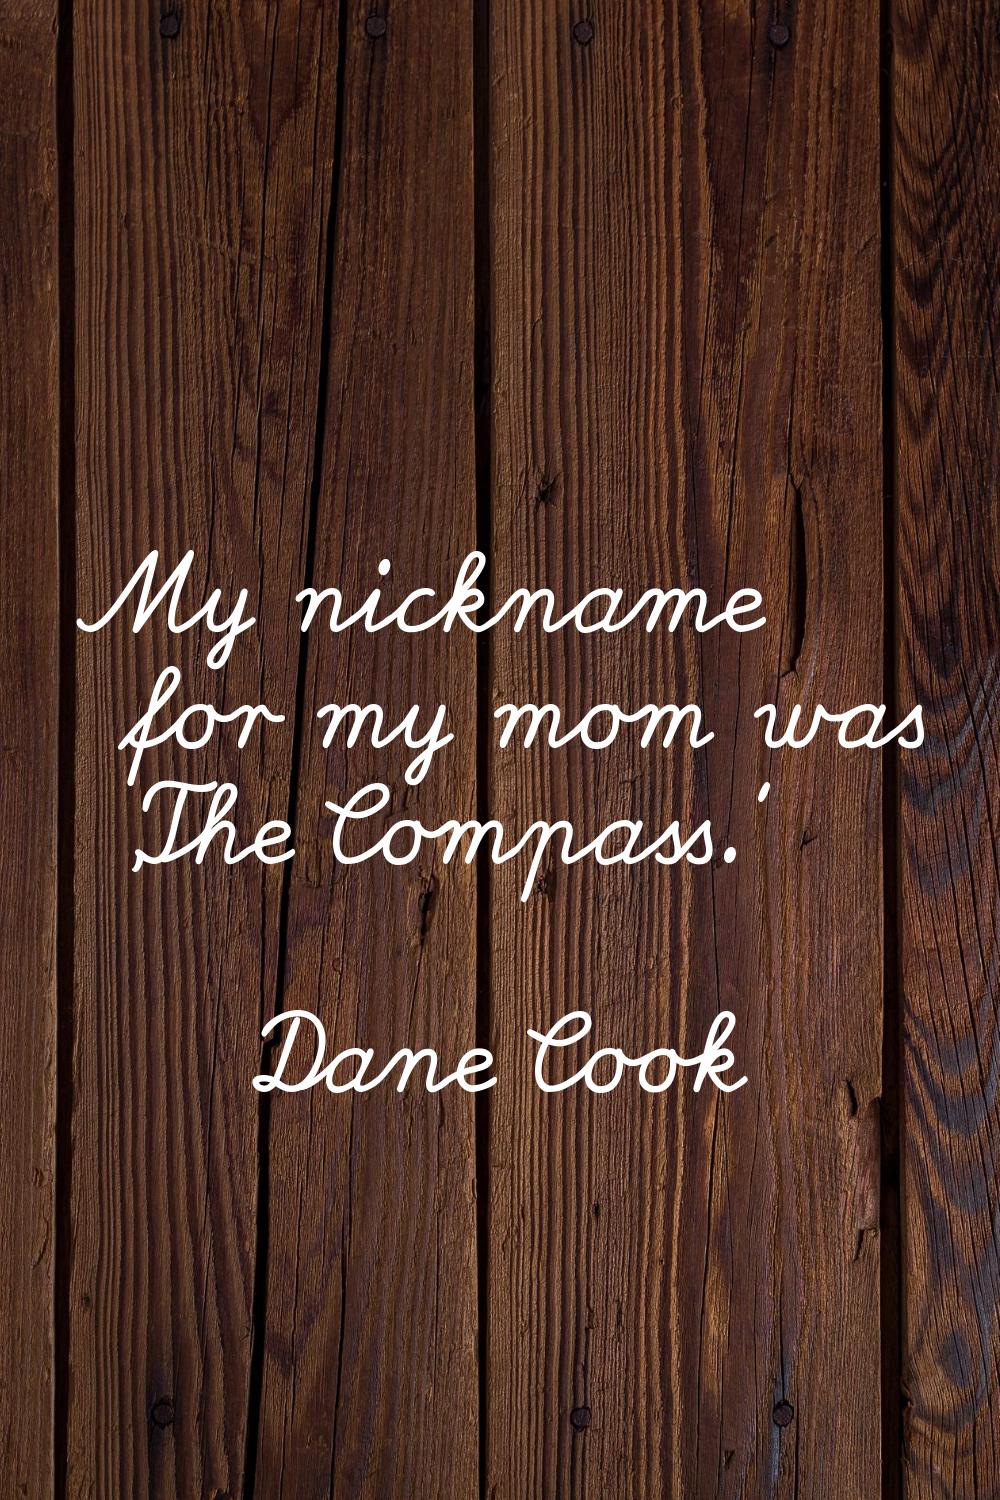 My nickname for my mom was 'The Compass.'